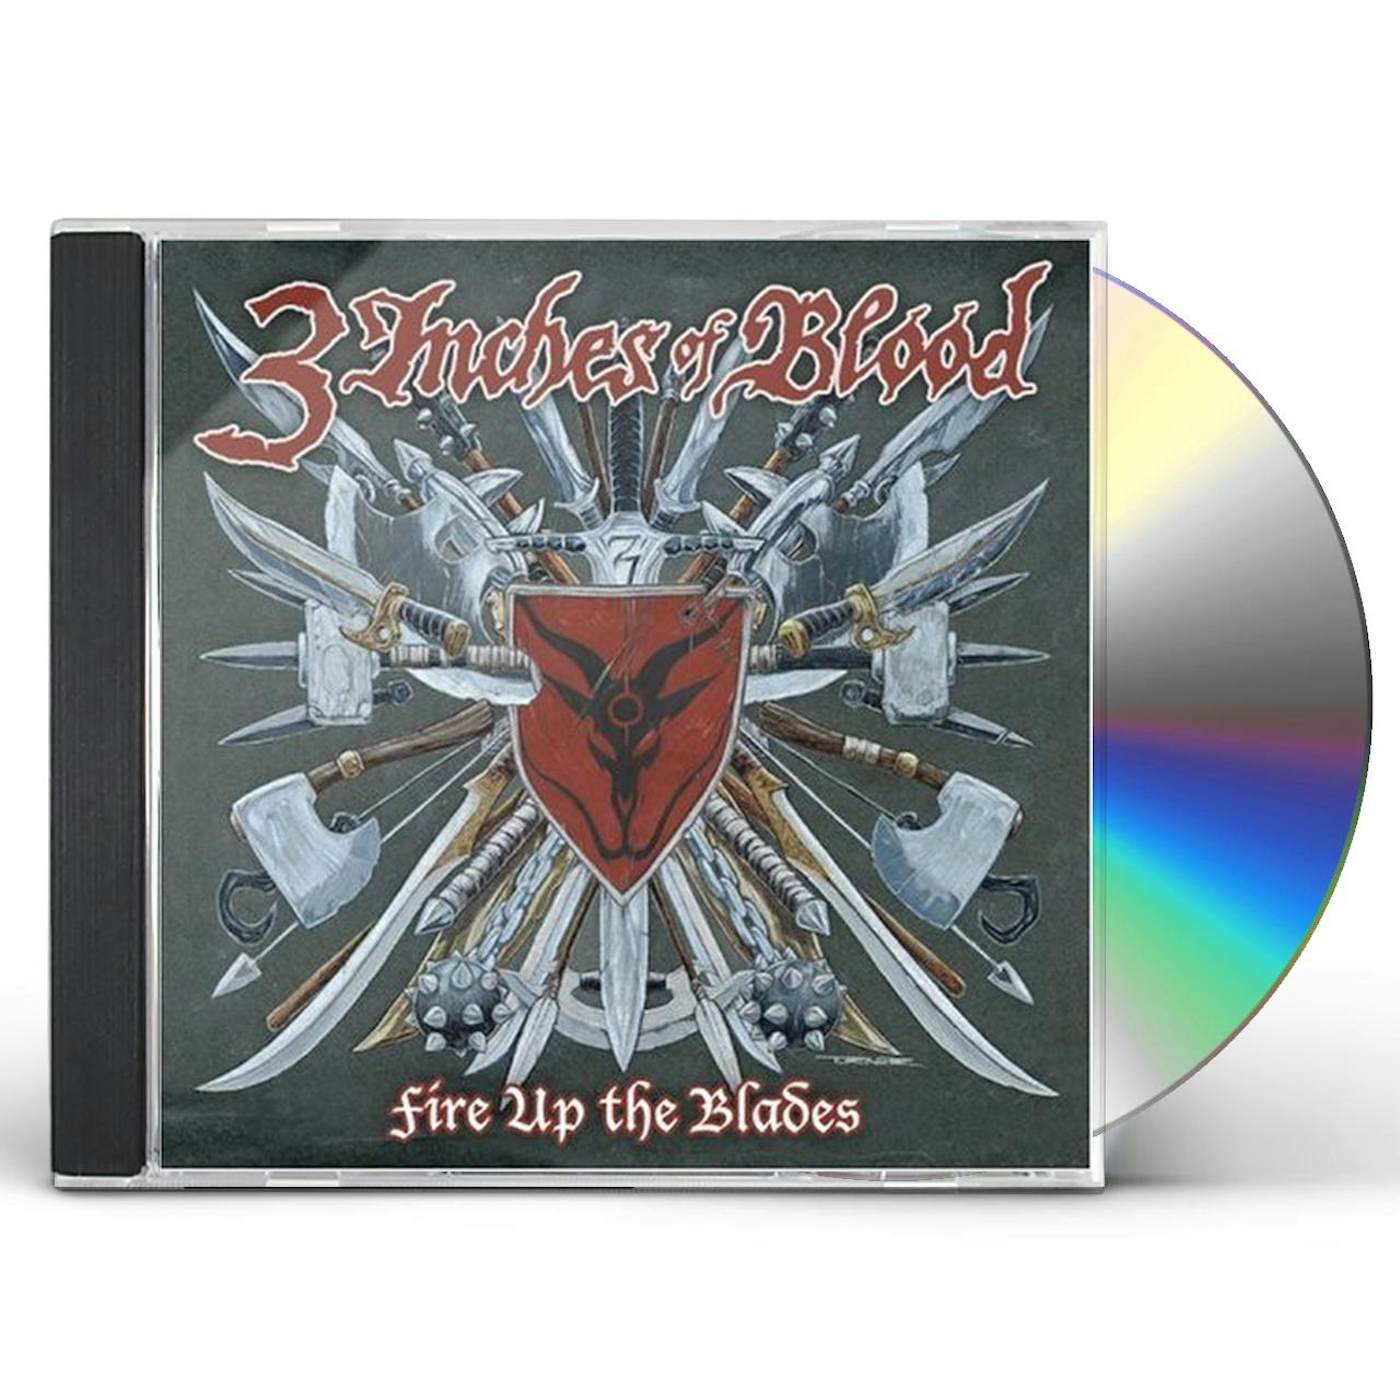 3 Inches Of Blood FIRE UP THE BLADES CD